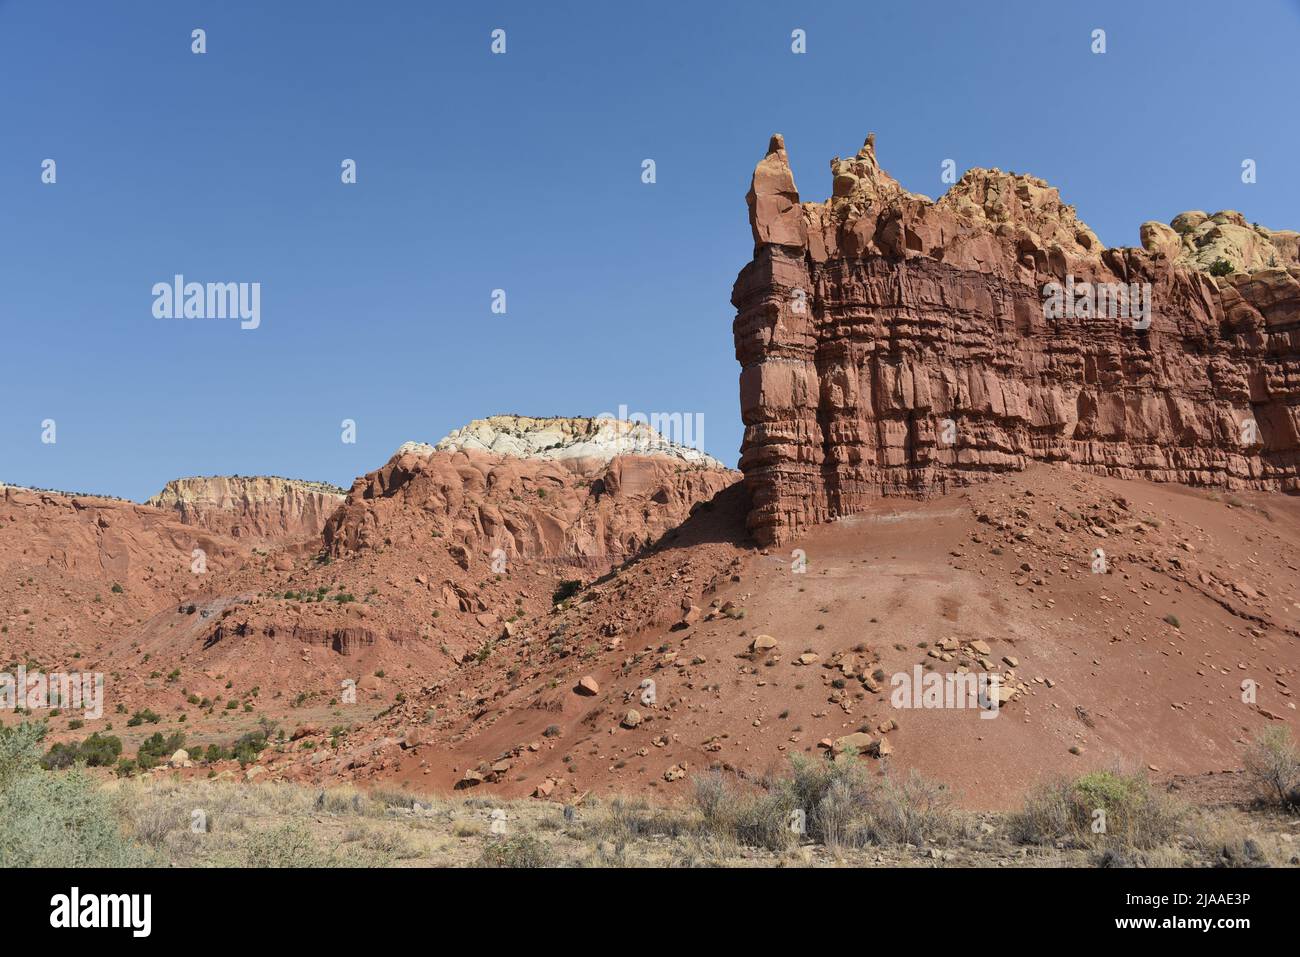 A beautifully colorful panoramic landscape of eroded sandstone formations, mesas, cliffs and mountains in Northern New Mexico. Note the full frame for Stock Photo